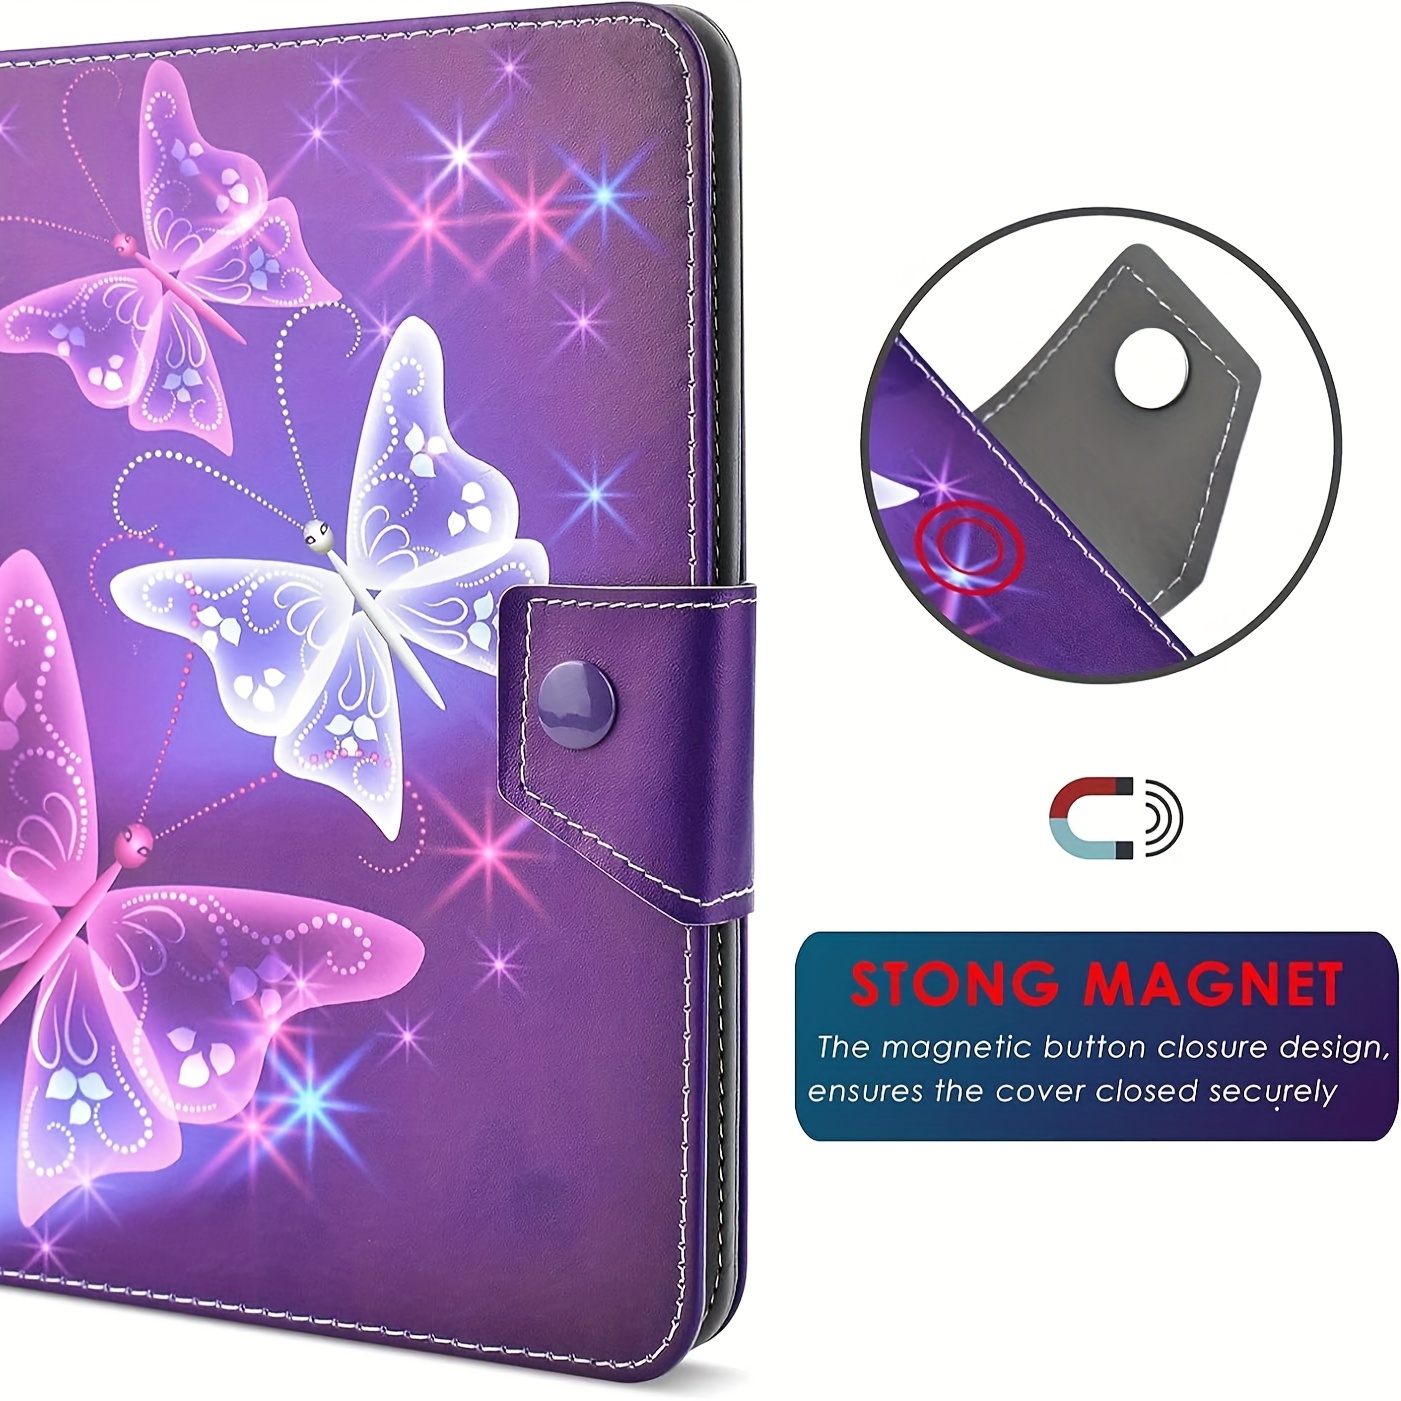 

Universal 10.1 Inch Tablet Case, 10 Inch Tablet Cover, Travel Portable Protective Case With 4 Fixed Rings For All Kinds Of 9.6-10.5 Inch Android/ios/windows Tablet #2